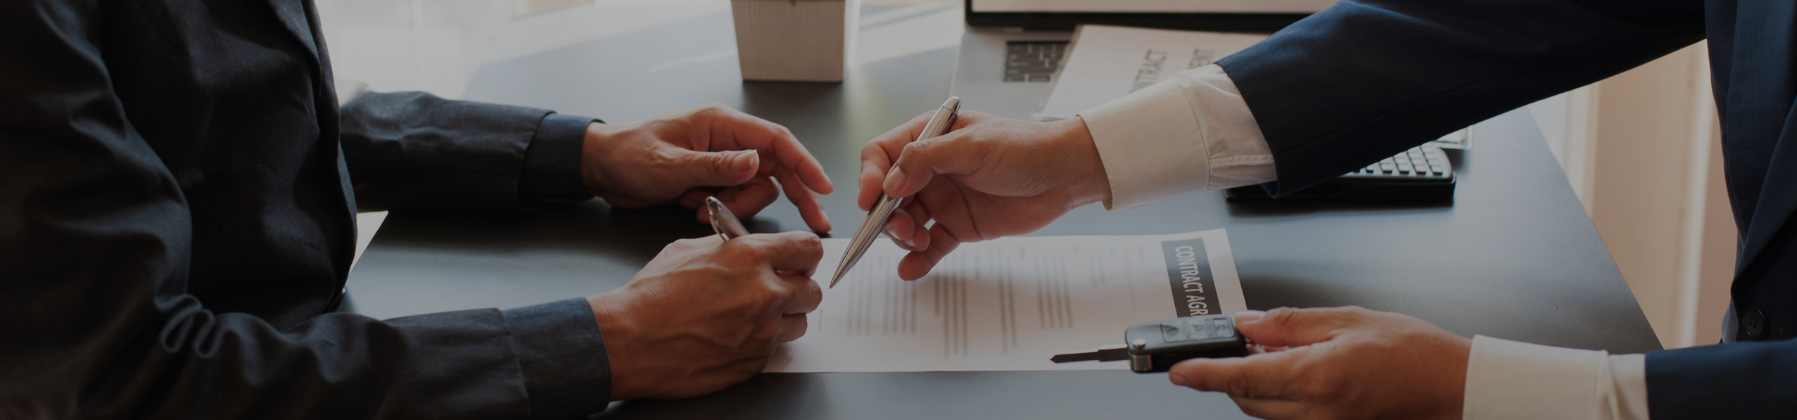 5 Benefits Of A Solid Service Agreement